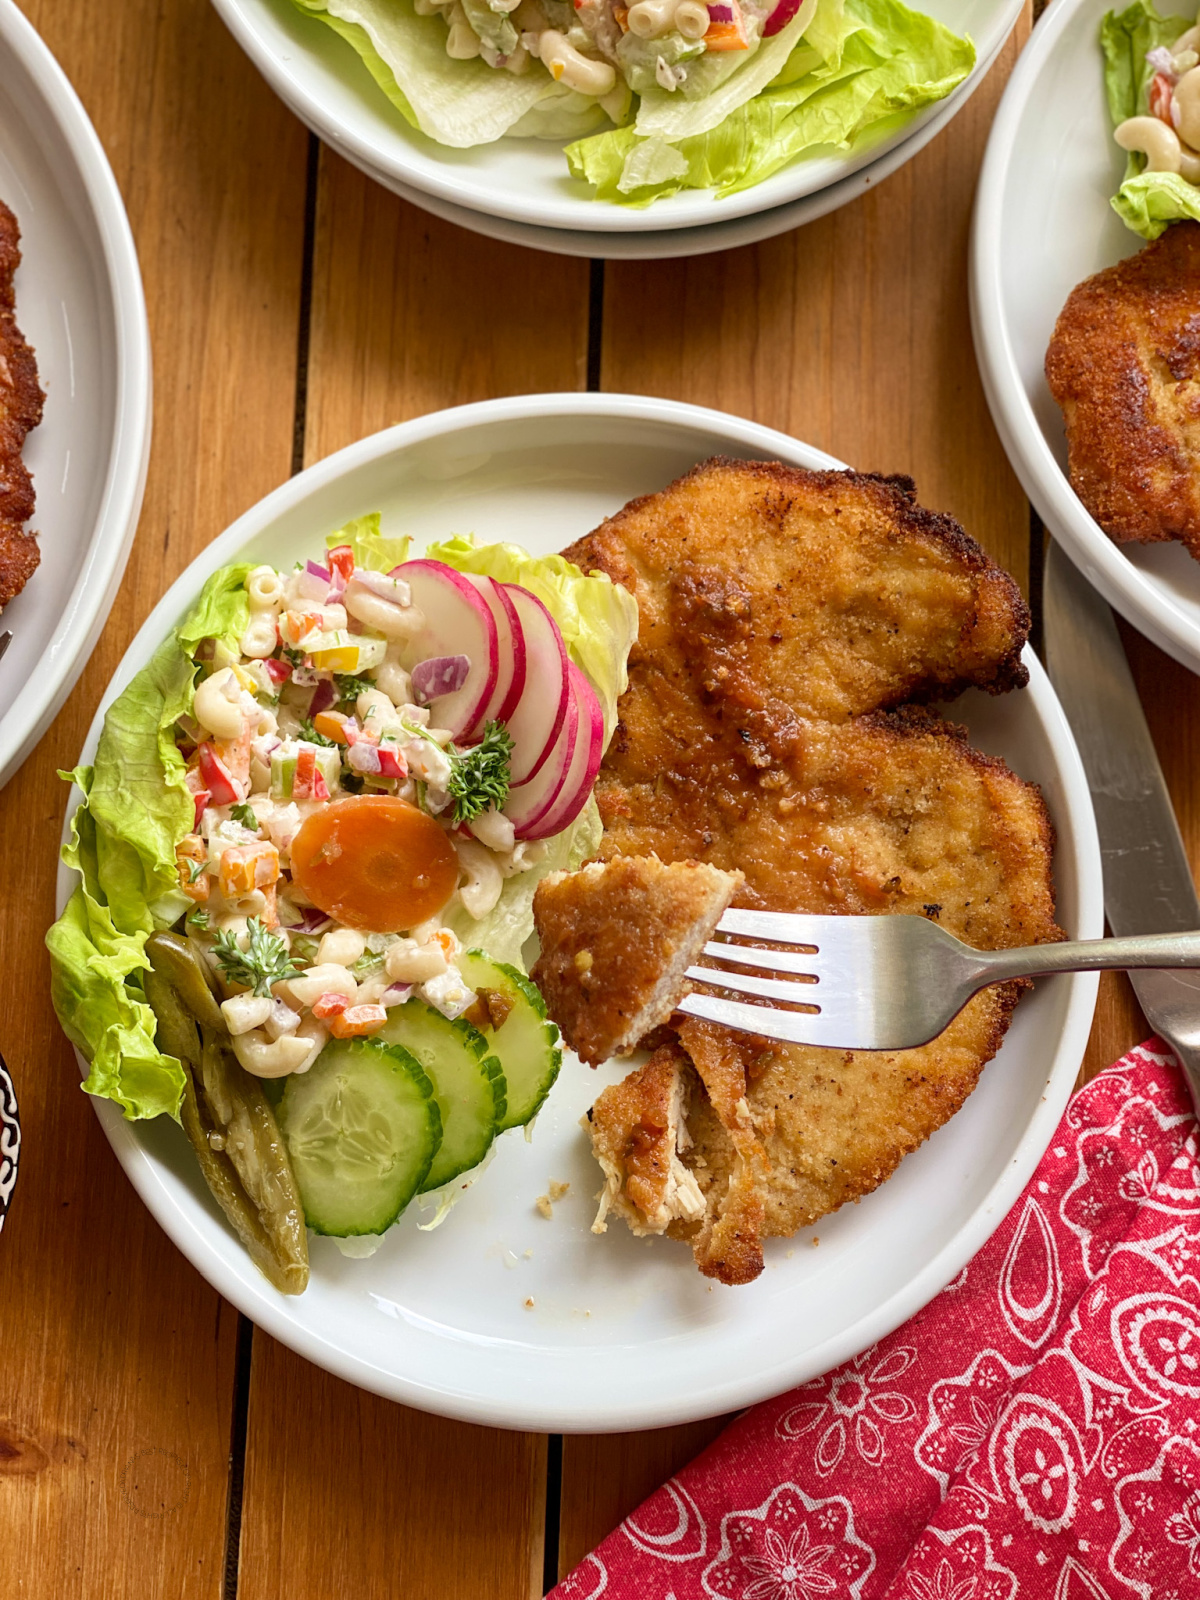 Easy recipes for your weekly menu include chicken milanesas and macaroni salad